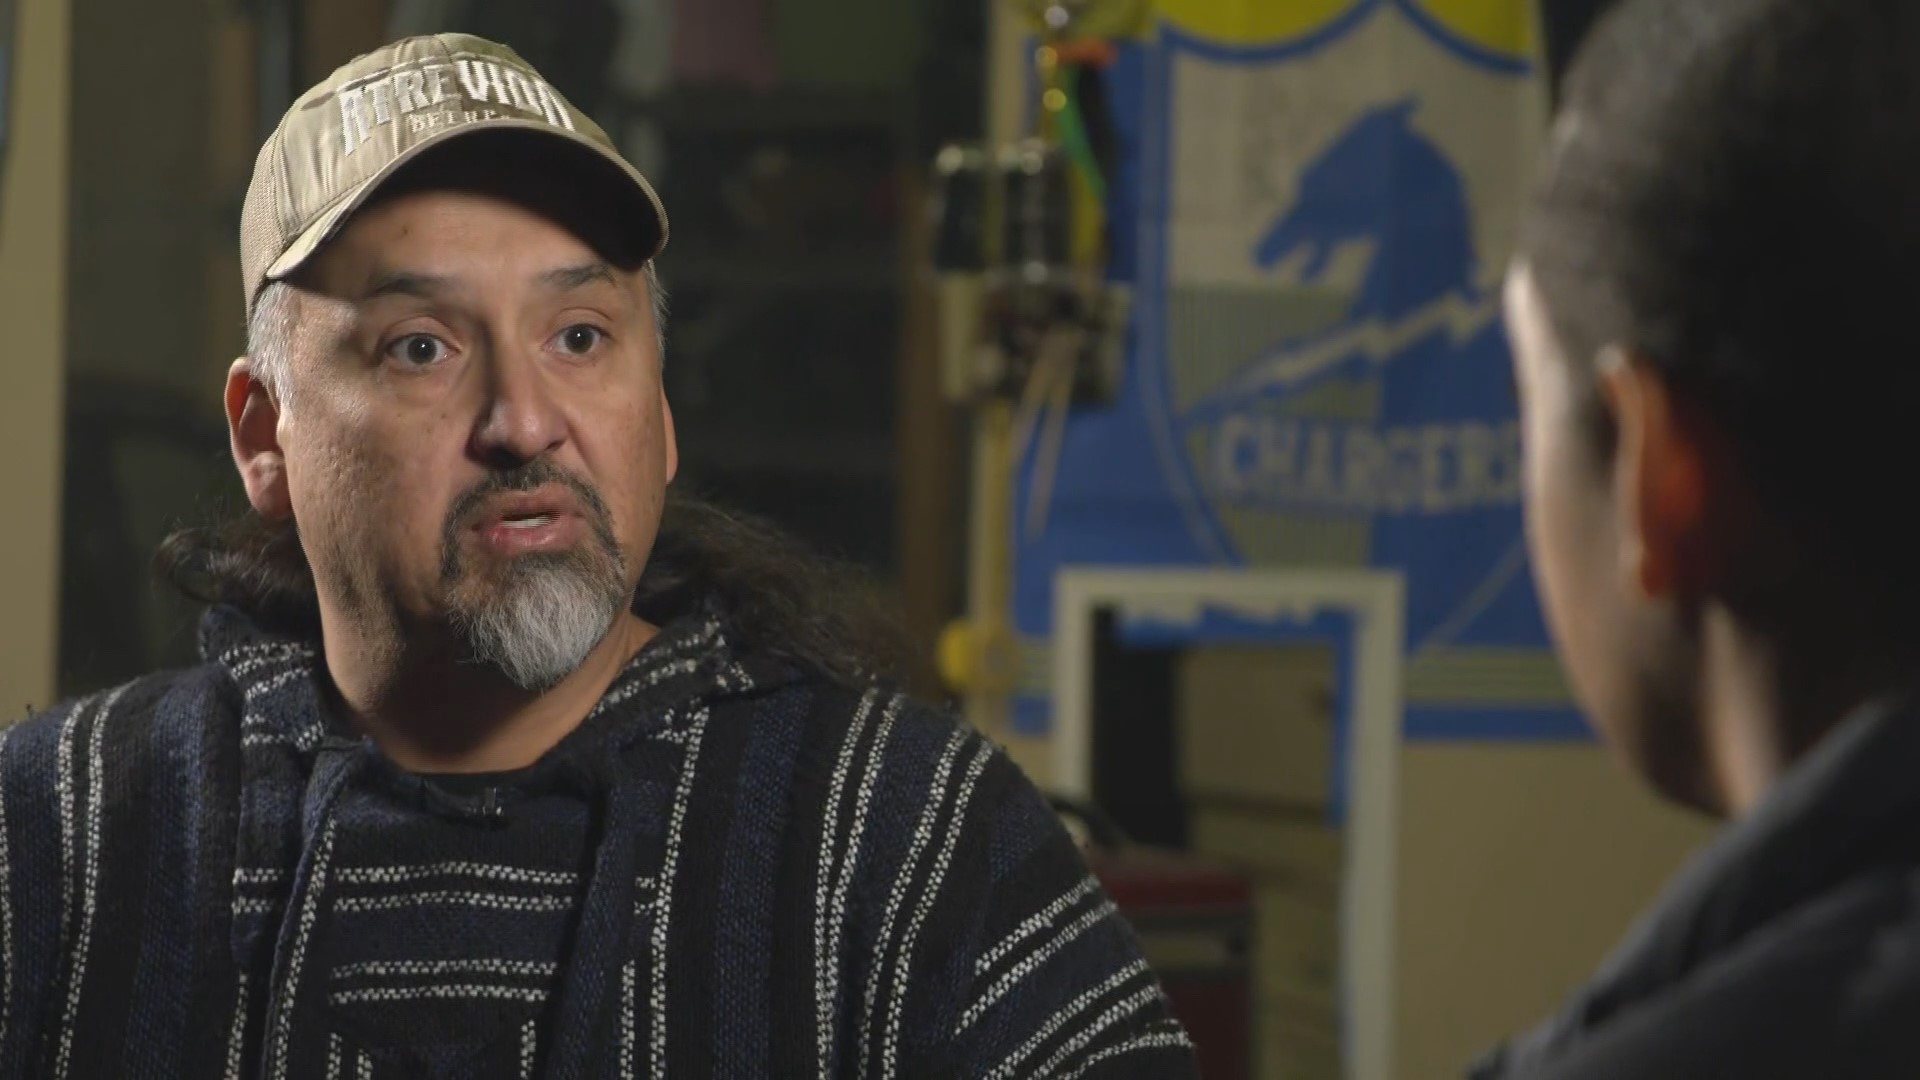 A man whose single-minded focus helped stop the killing during the shooting at Colorado Springs' Club Q Saturday, sat down with NBC's Steve Patterson.